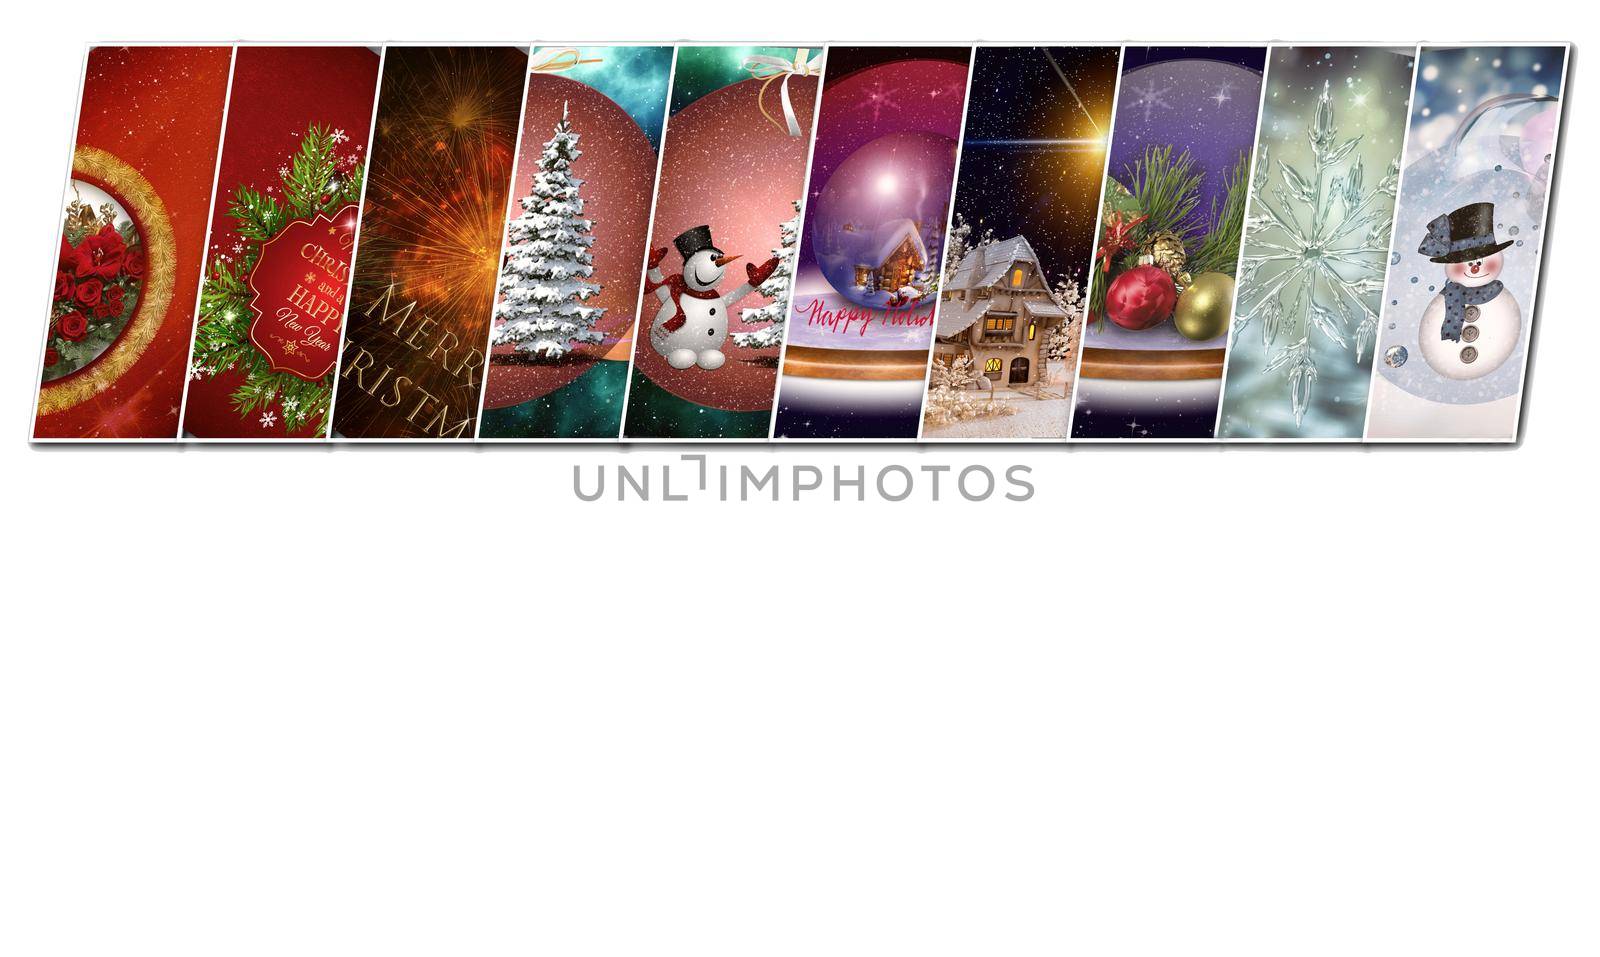 Ten images on the theme of Christmas combined into a collage. Presented on a white background, there is room for your text.